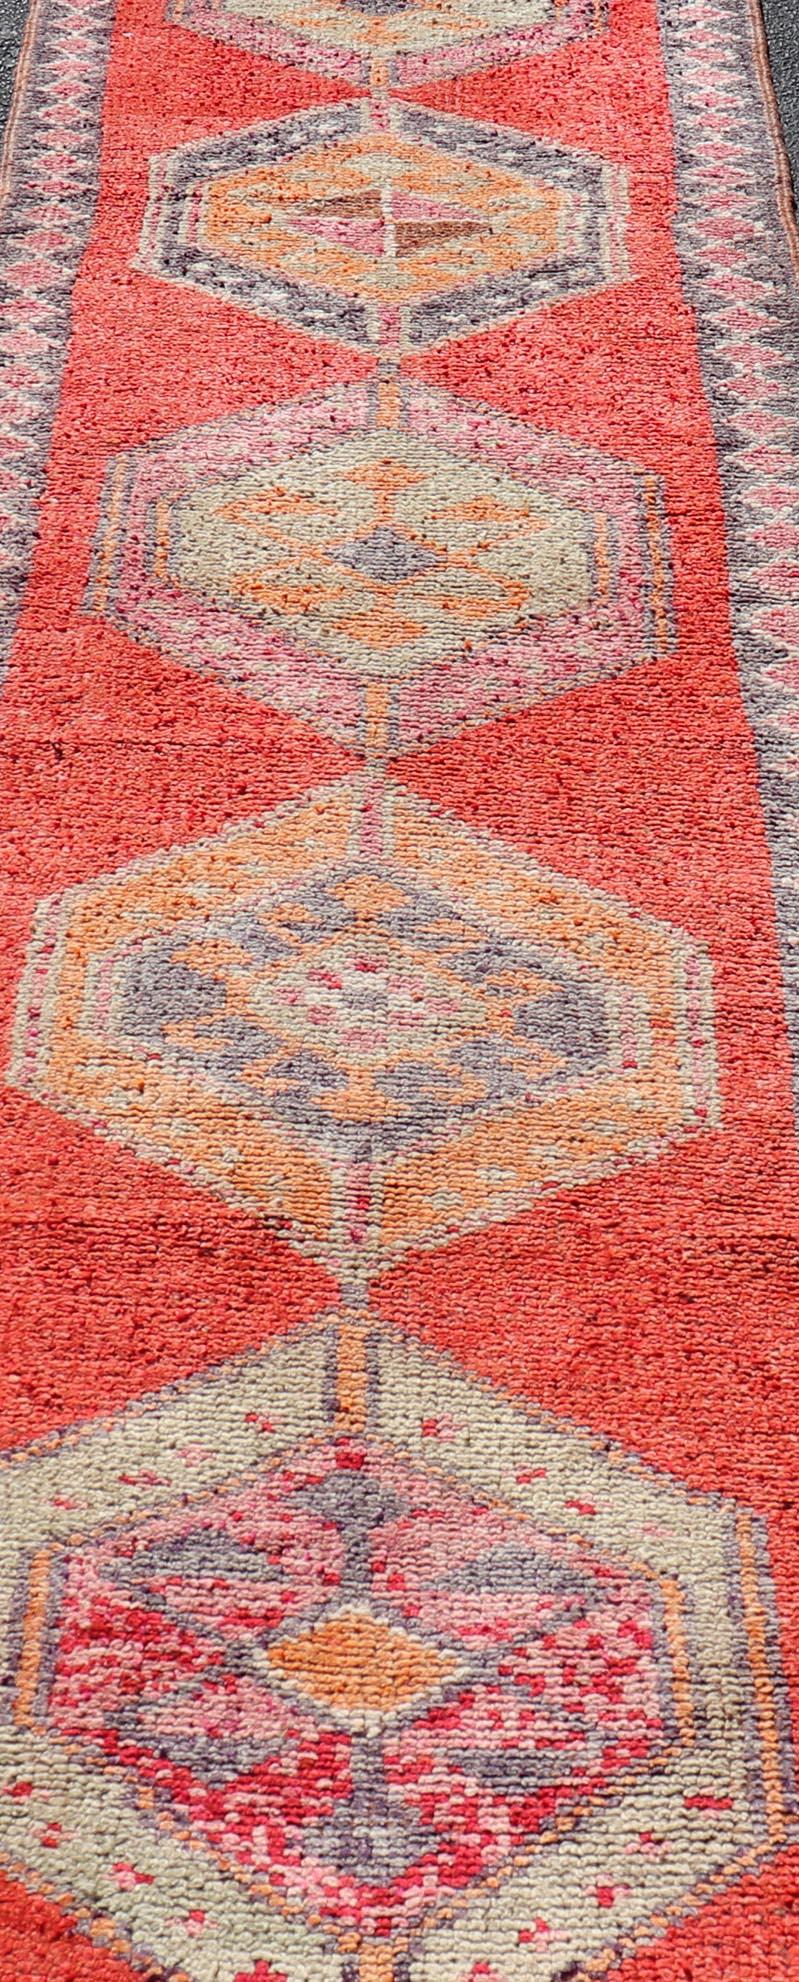 Oushak Vintage Turkish Runner with Geometric Medallion Design with Orangey-Red For Sale 2